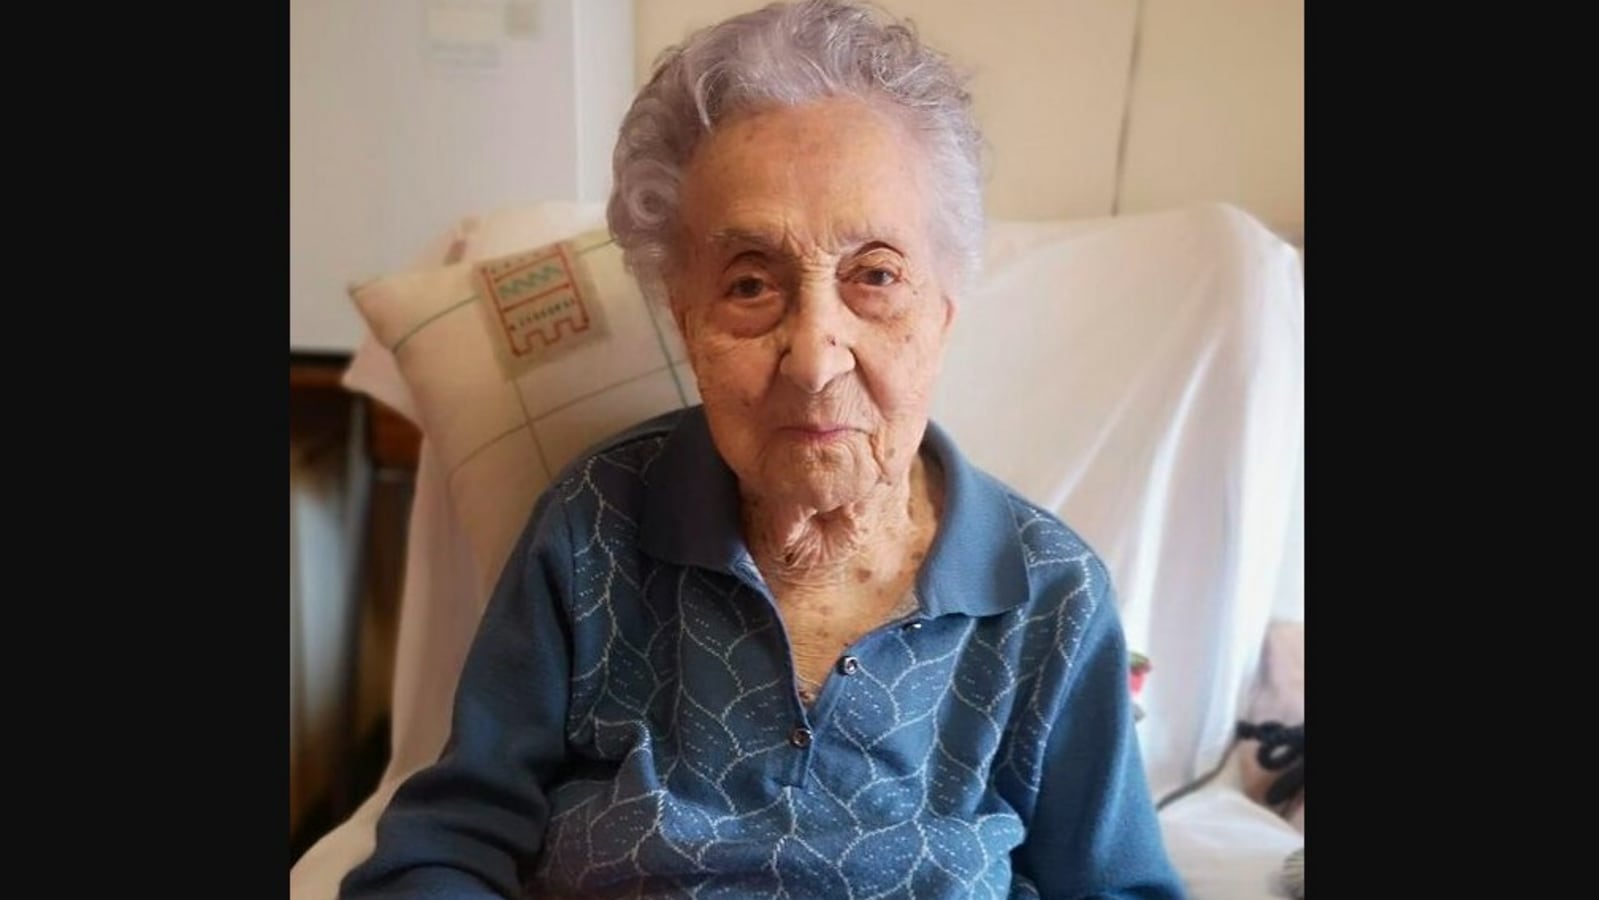 Maria Branyas: The oldest person in the world is a 115-year-old